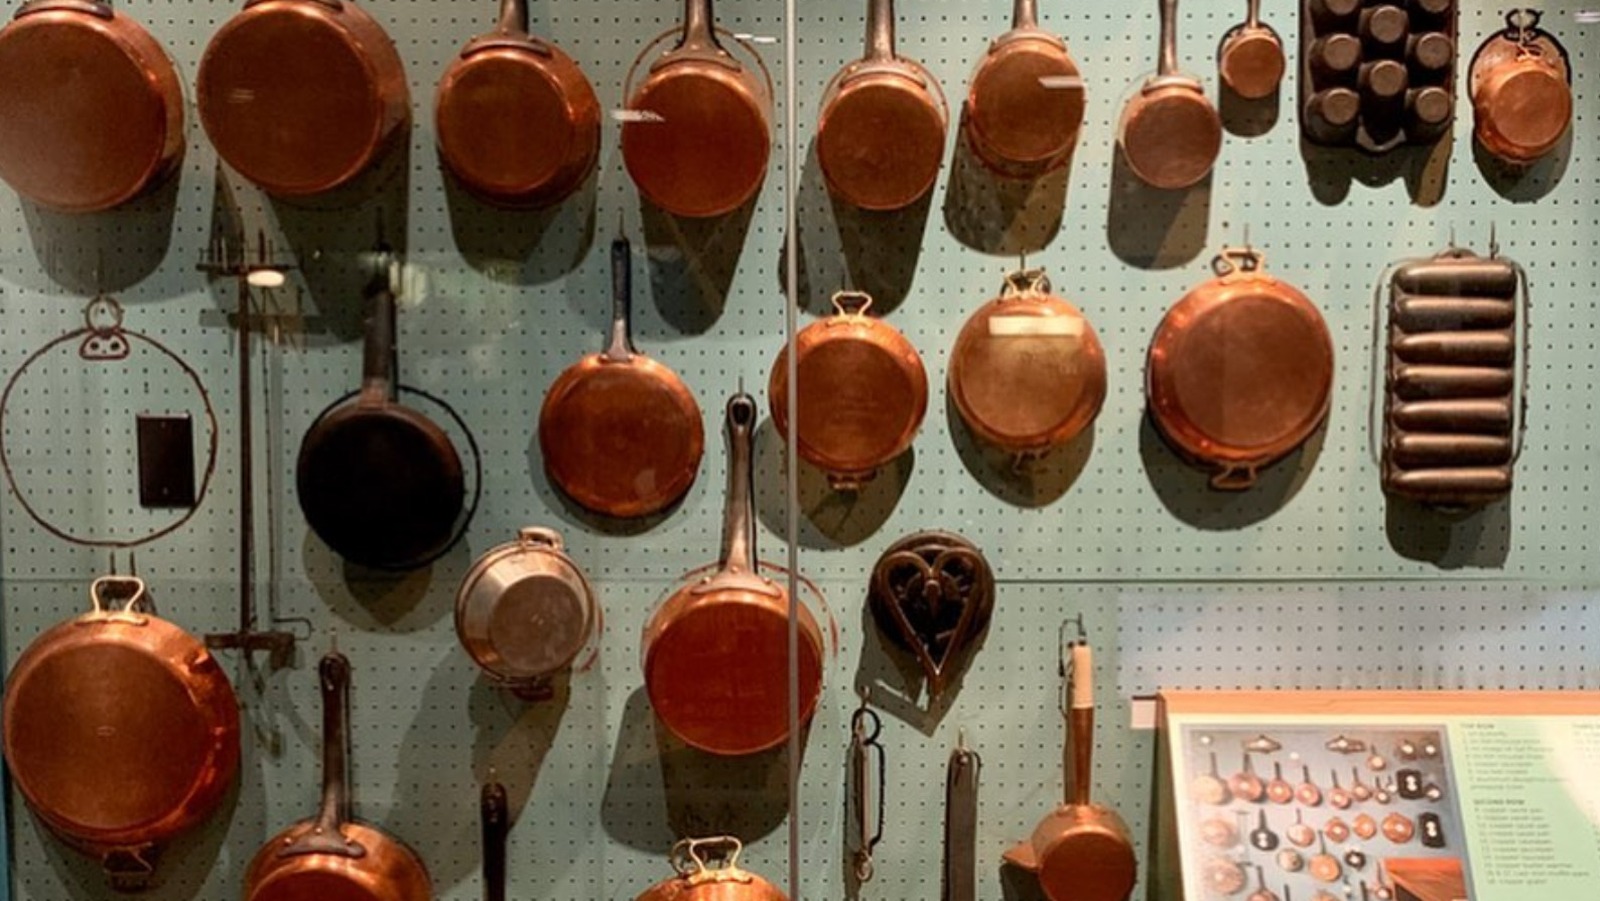 https://www.tastingtable.com/img/gallery/the-reason-julia-child-always-used-copper-pots-and-pans/l-intro-1653240049.jpg